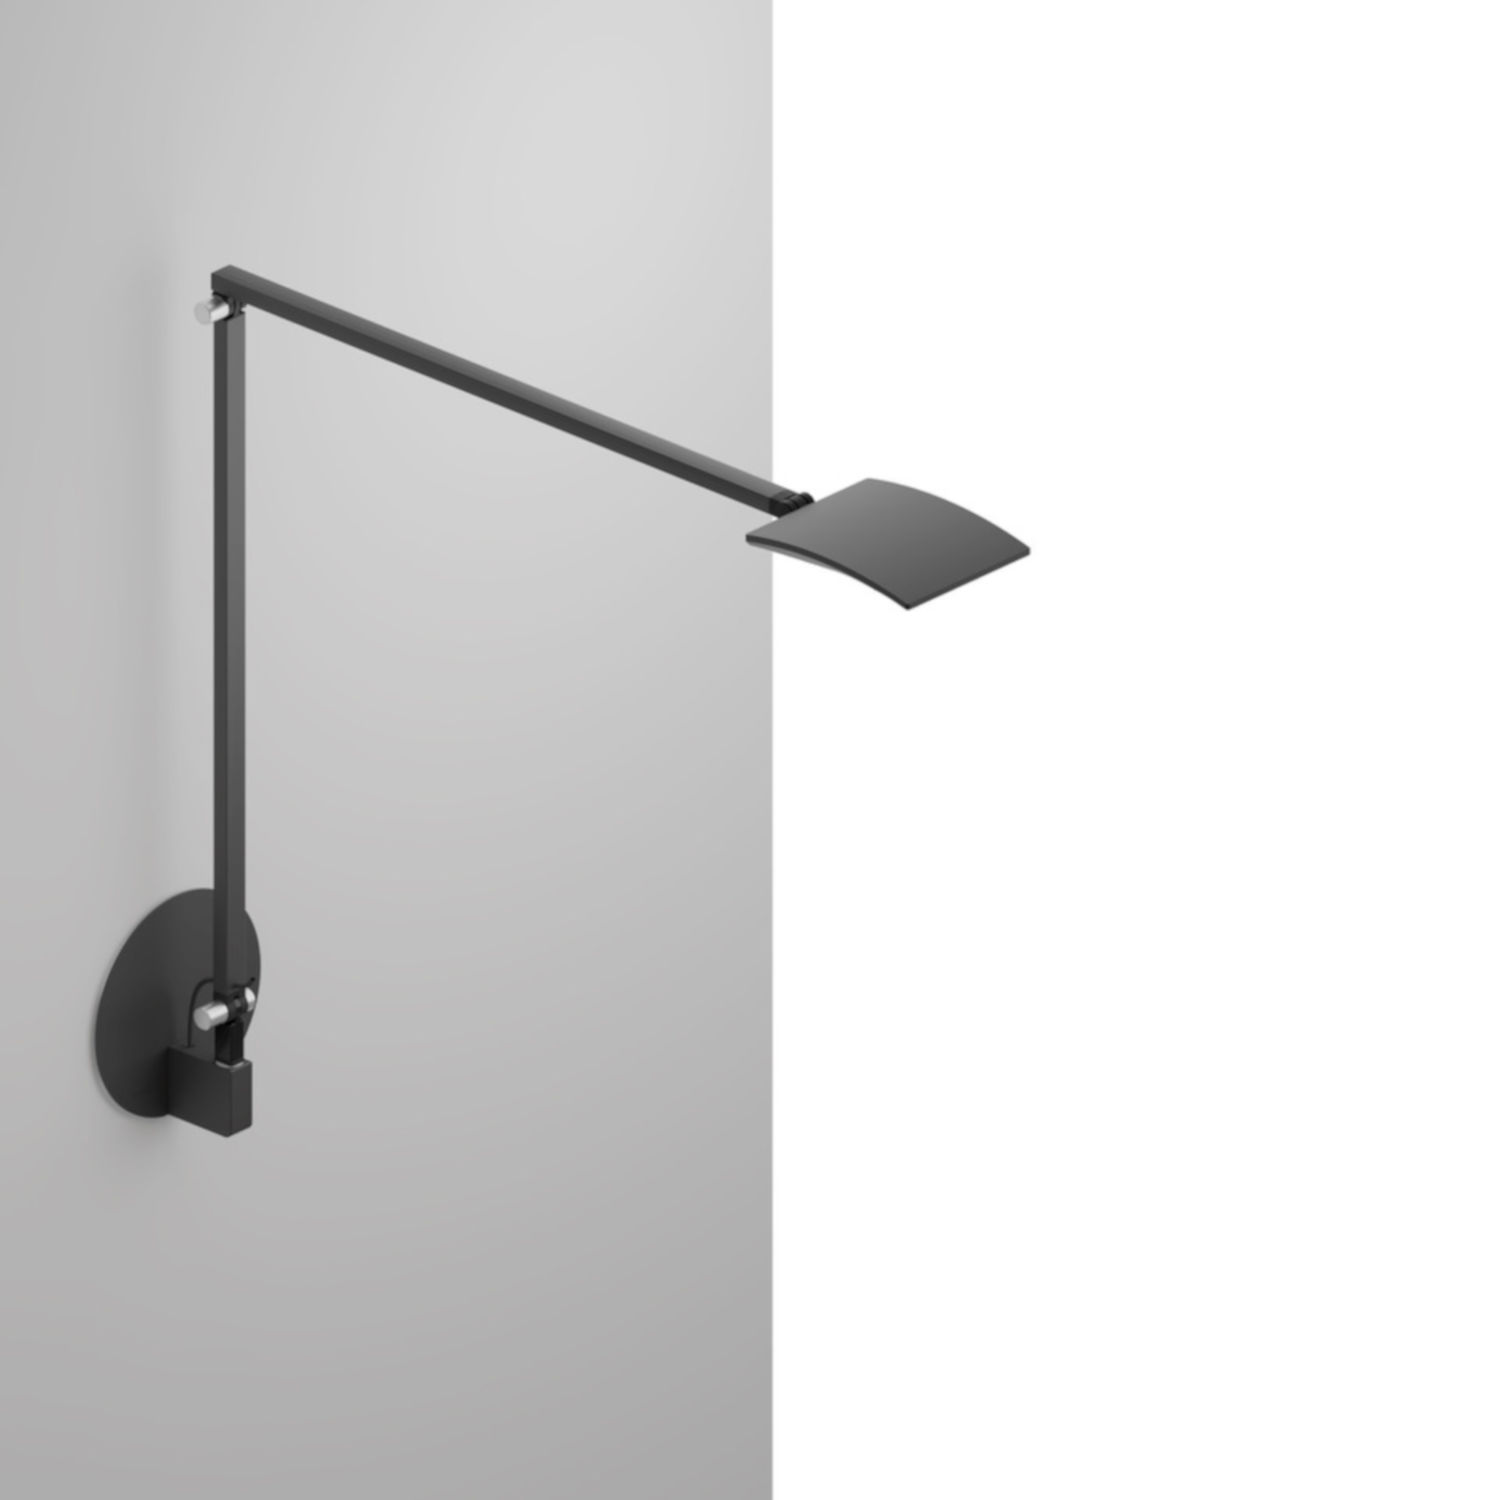 Mosso Metallic Black Led Pro Desk Lamp With Hardwired Wall Mount